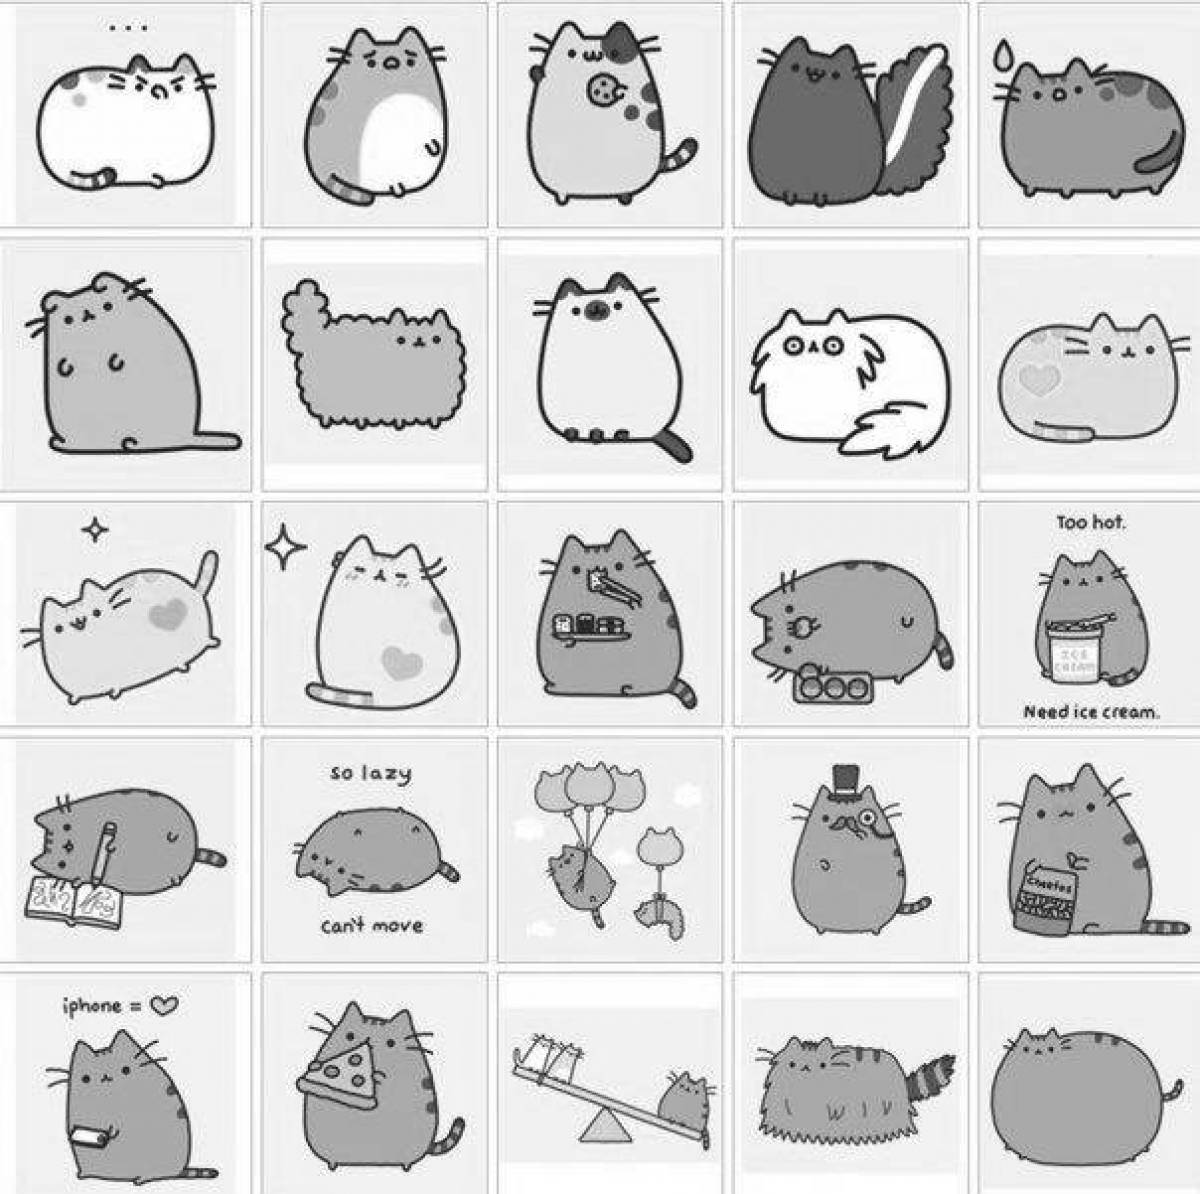 Pusheen's playful coloring page